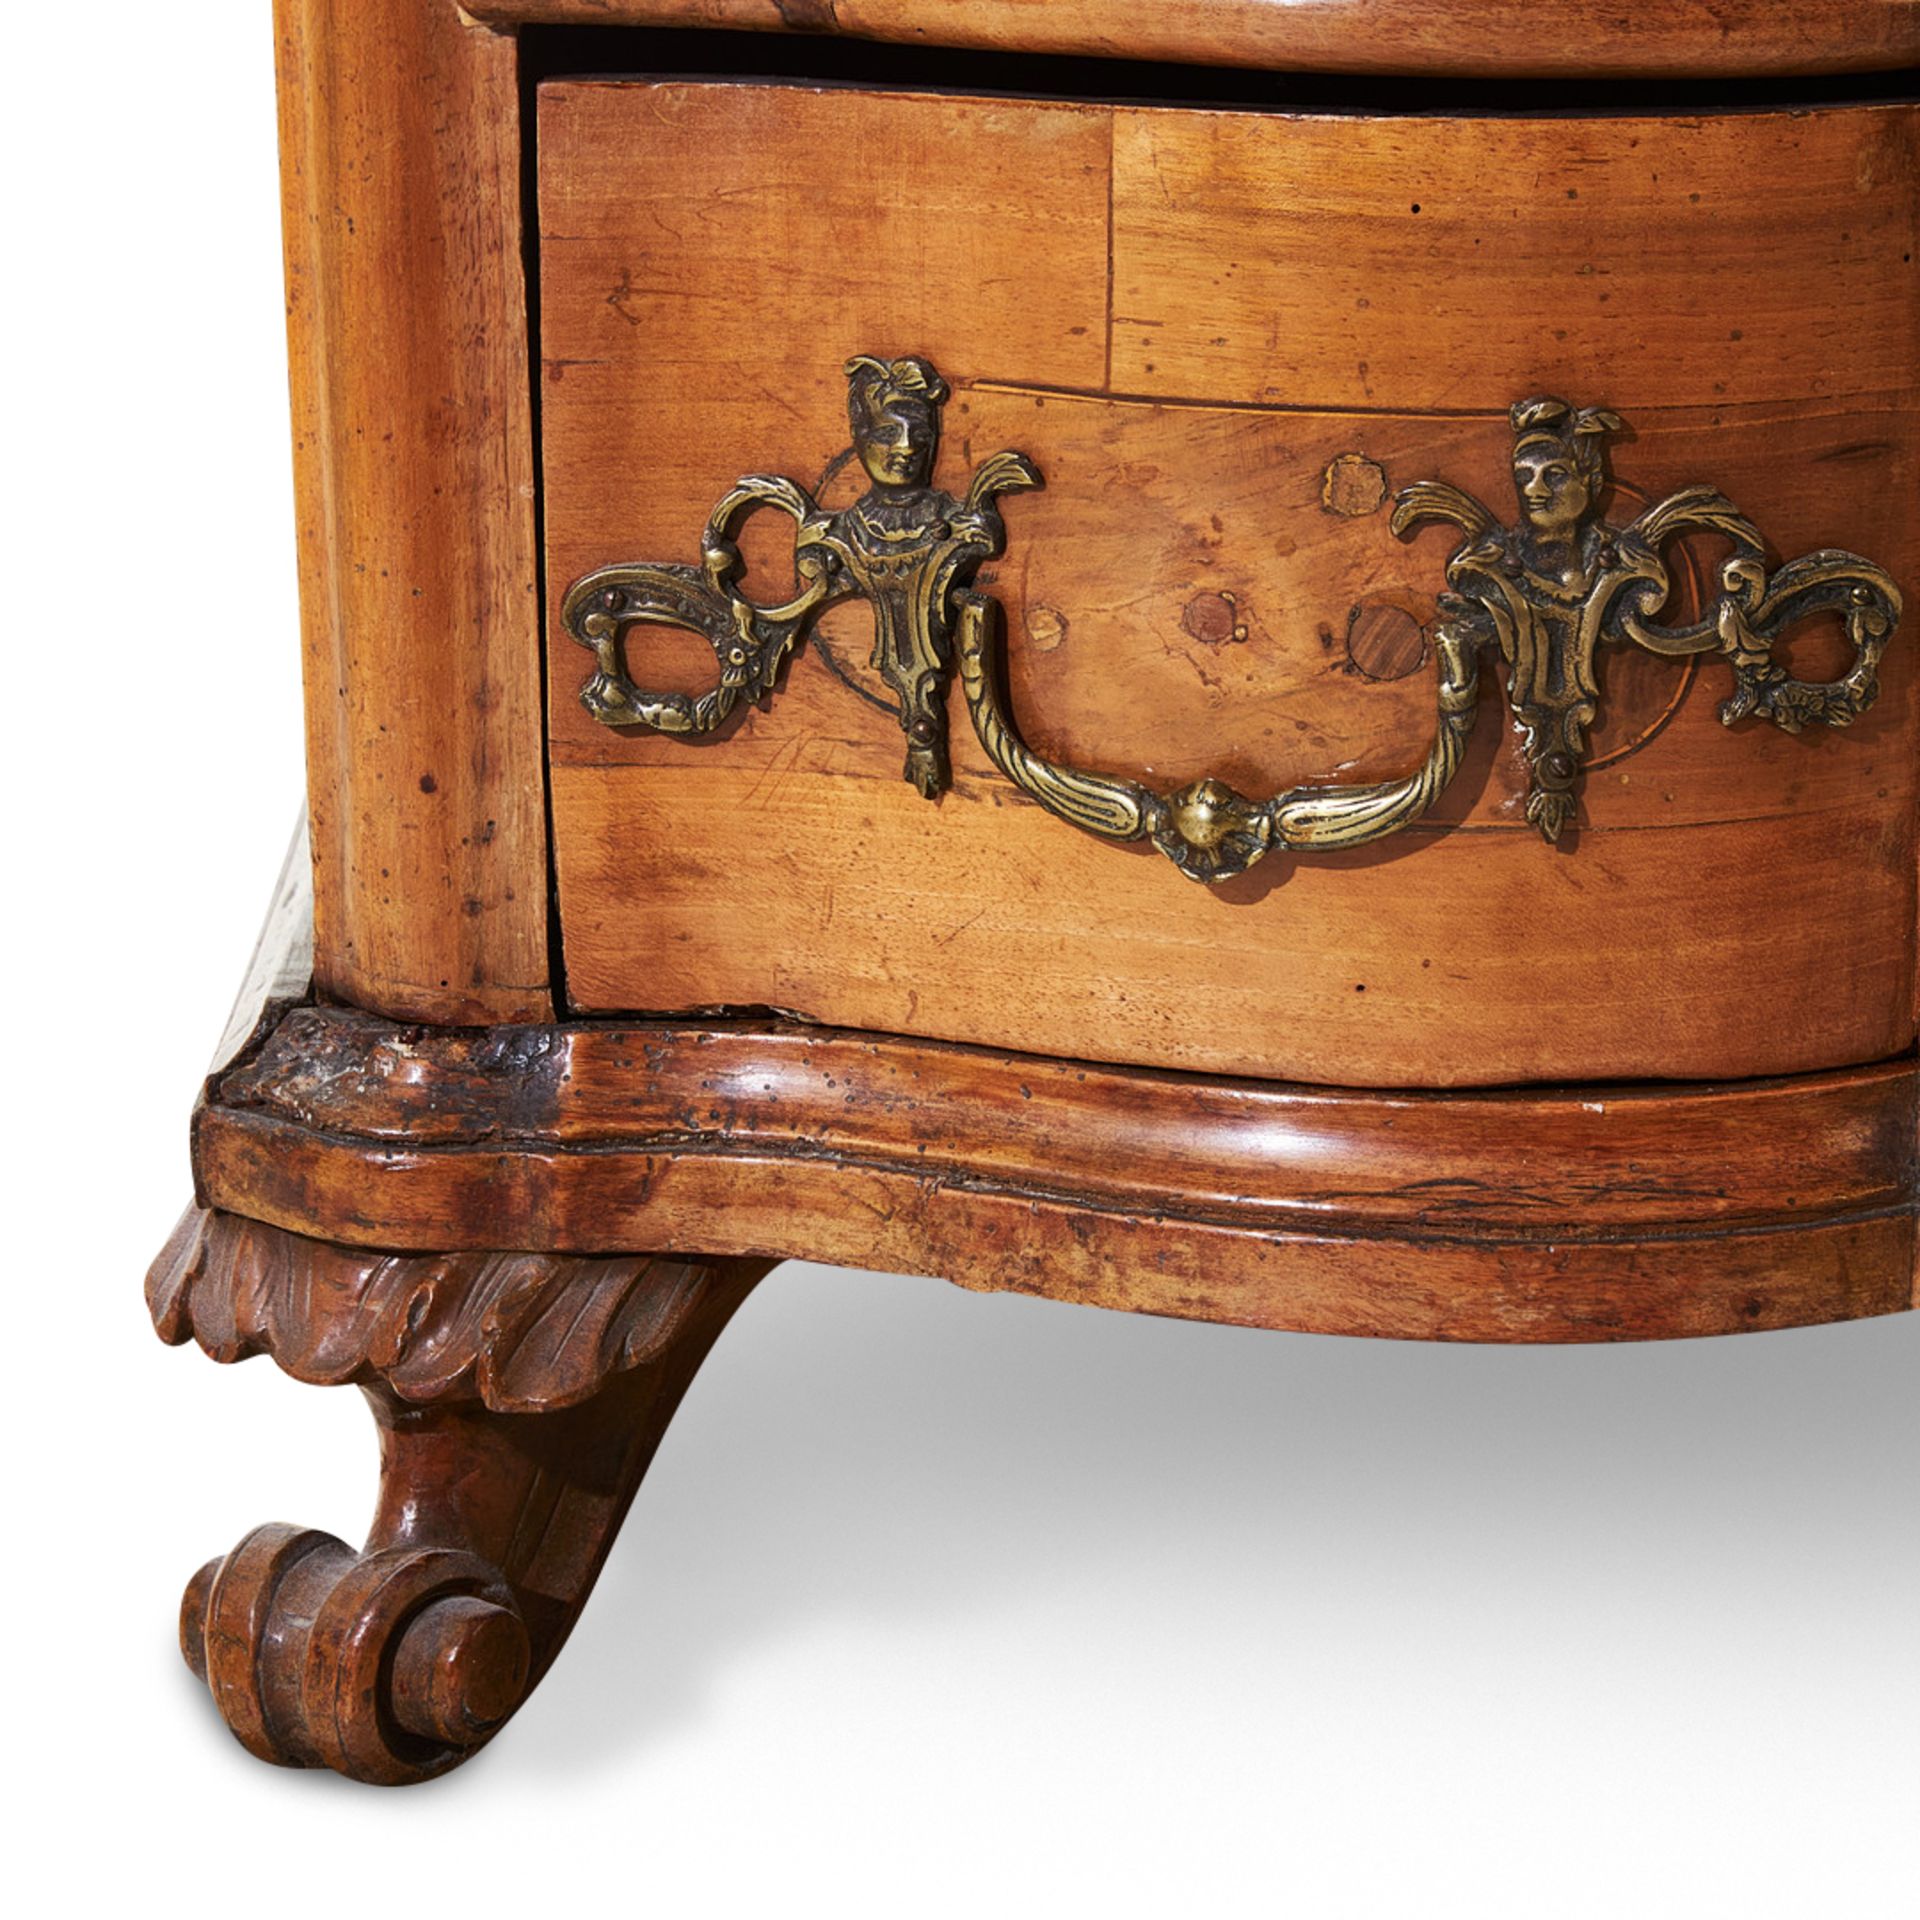 AN 18TH CENTURY ITALIAN WALNUT SERPENTINE CHEST OF DRAWERS - Image 5 of 8